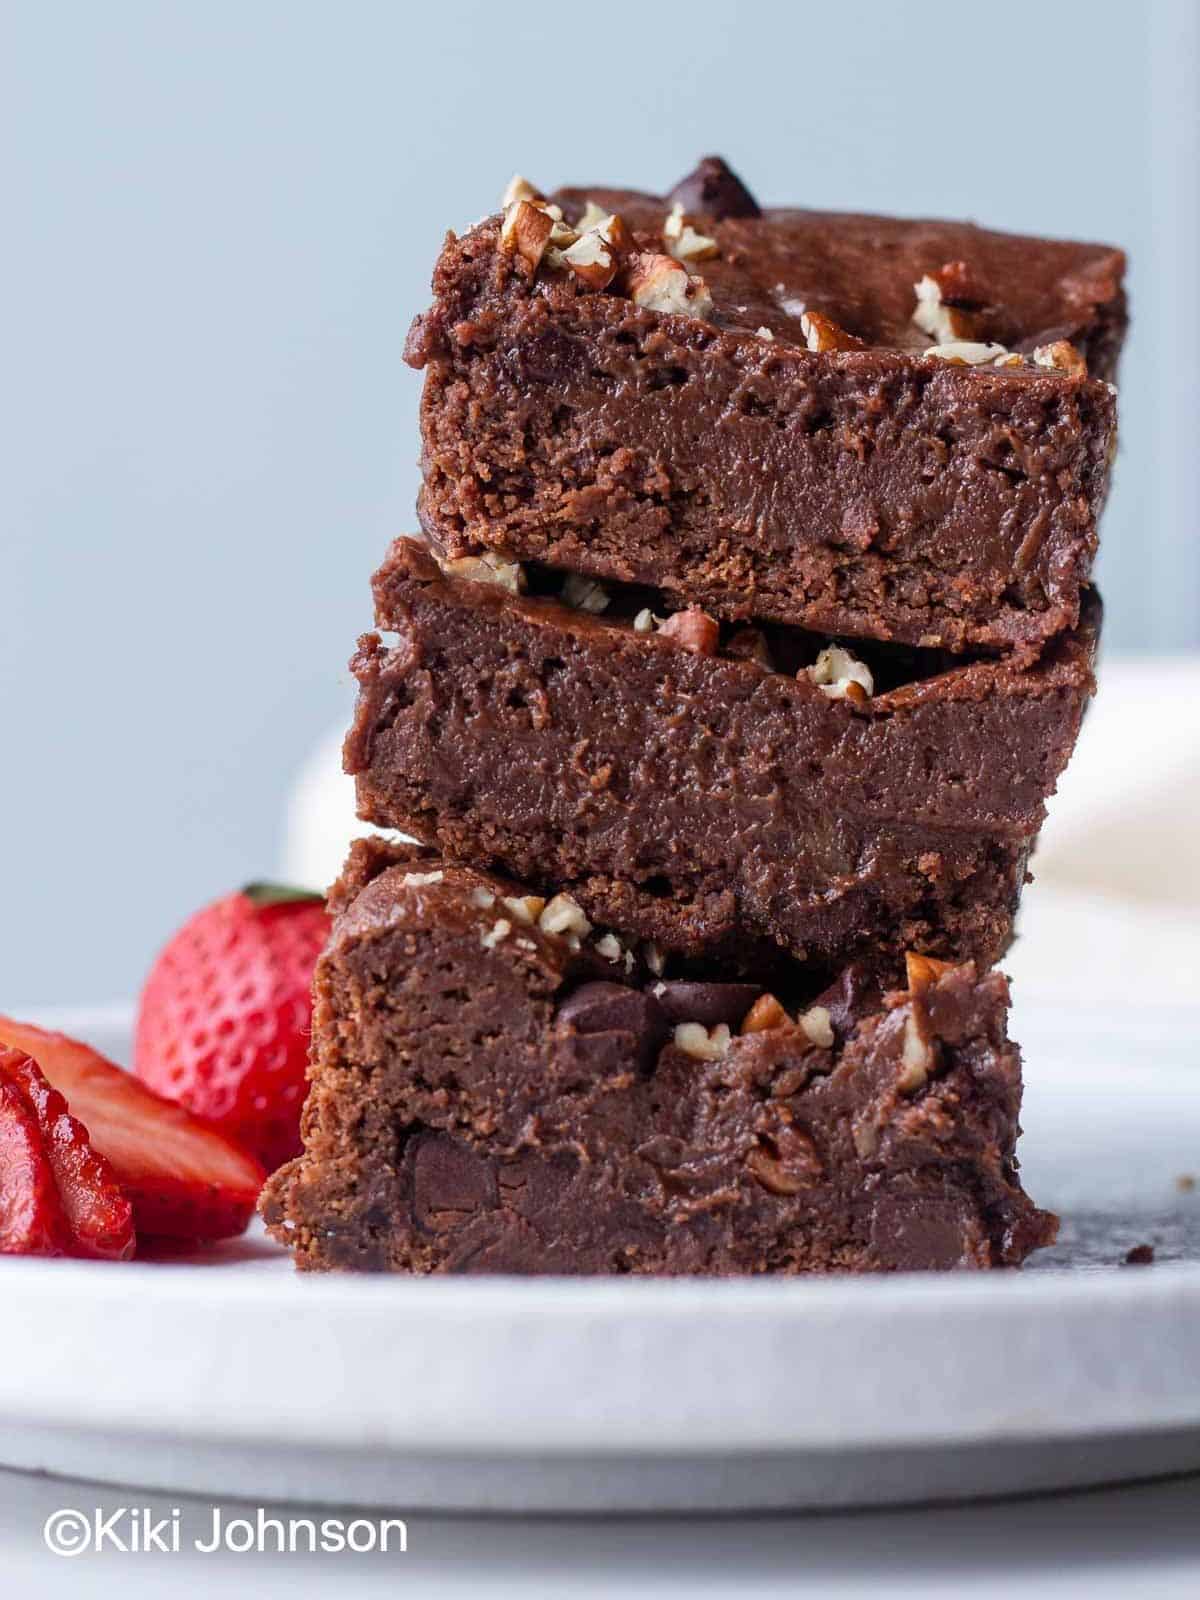 fudgy eggless Nutella brownies featuring a shiny thin crust on top, bursting with Nutella spread and sprinkled with nuts and chocolate chips.